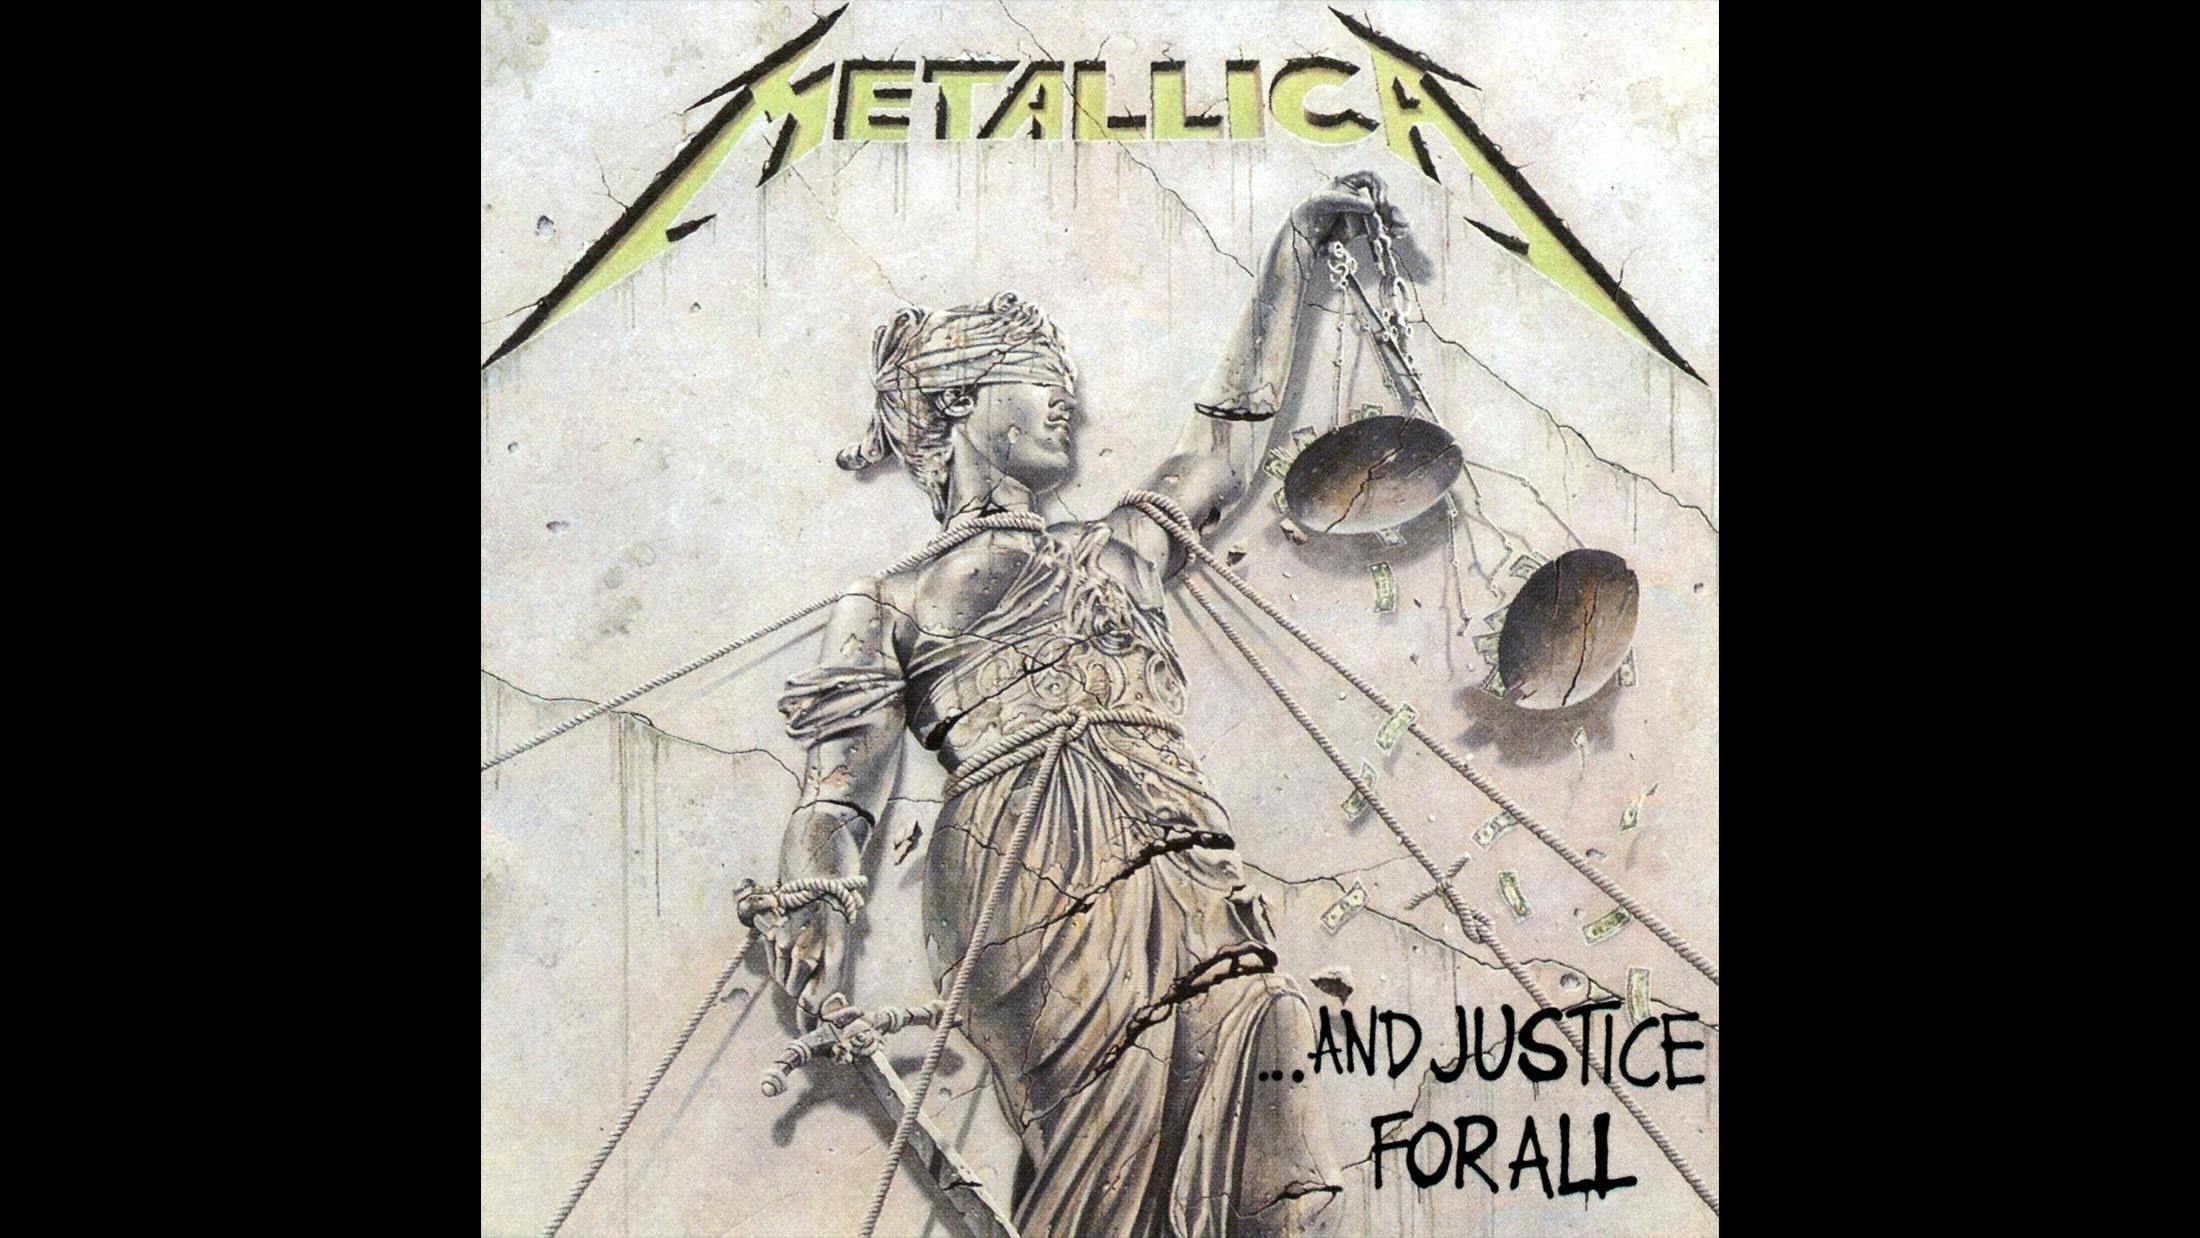 Metallica’s fourth album was made in the shadow of unspeakable tragedy. On September 27, 1986 bassist Cliff Burton, a key architect in the thrash metallers’ sound, was killed in a bus crash in Sweden. His bandmates decided to continue, recruiting Flotsam And Jetsom bassist Jason Newsted and producing this aggressive epic. Setting aside the topics of the album’s stifling production and near-inaudible bass sound, …And Justice For All undoubtedly took Metallica in deeper, darker directions, as exemplified by anti-war epic One.